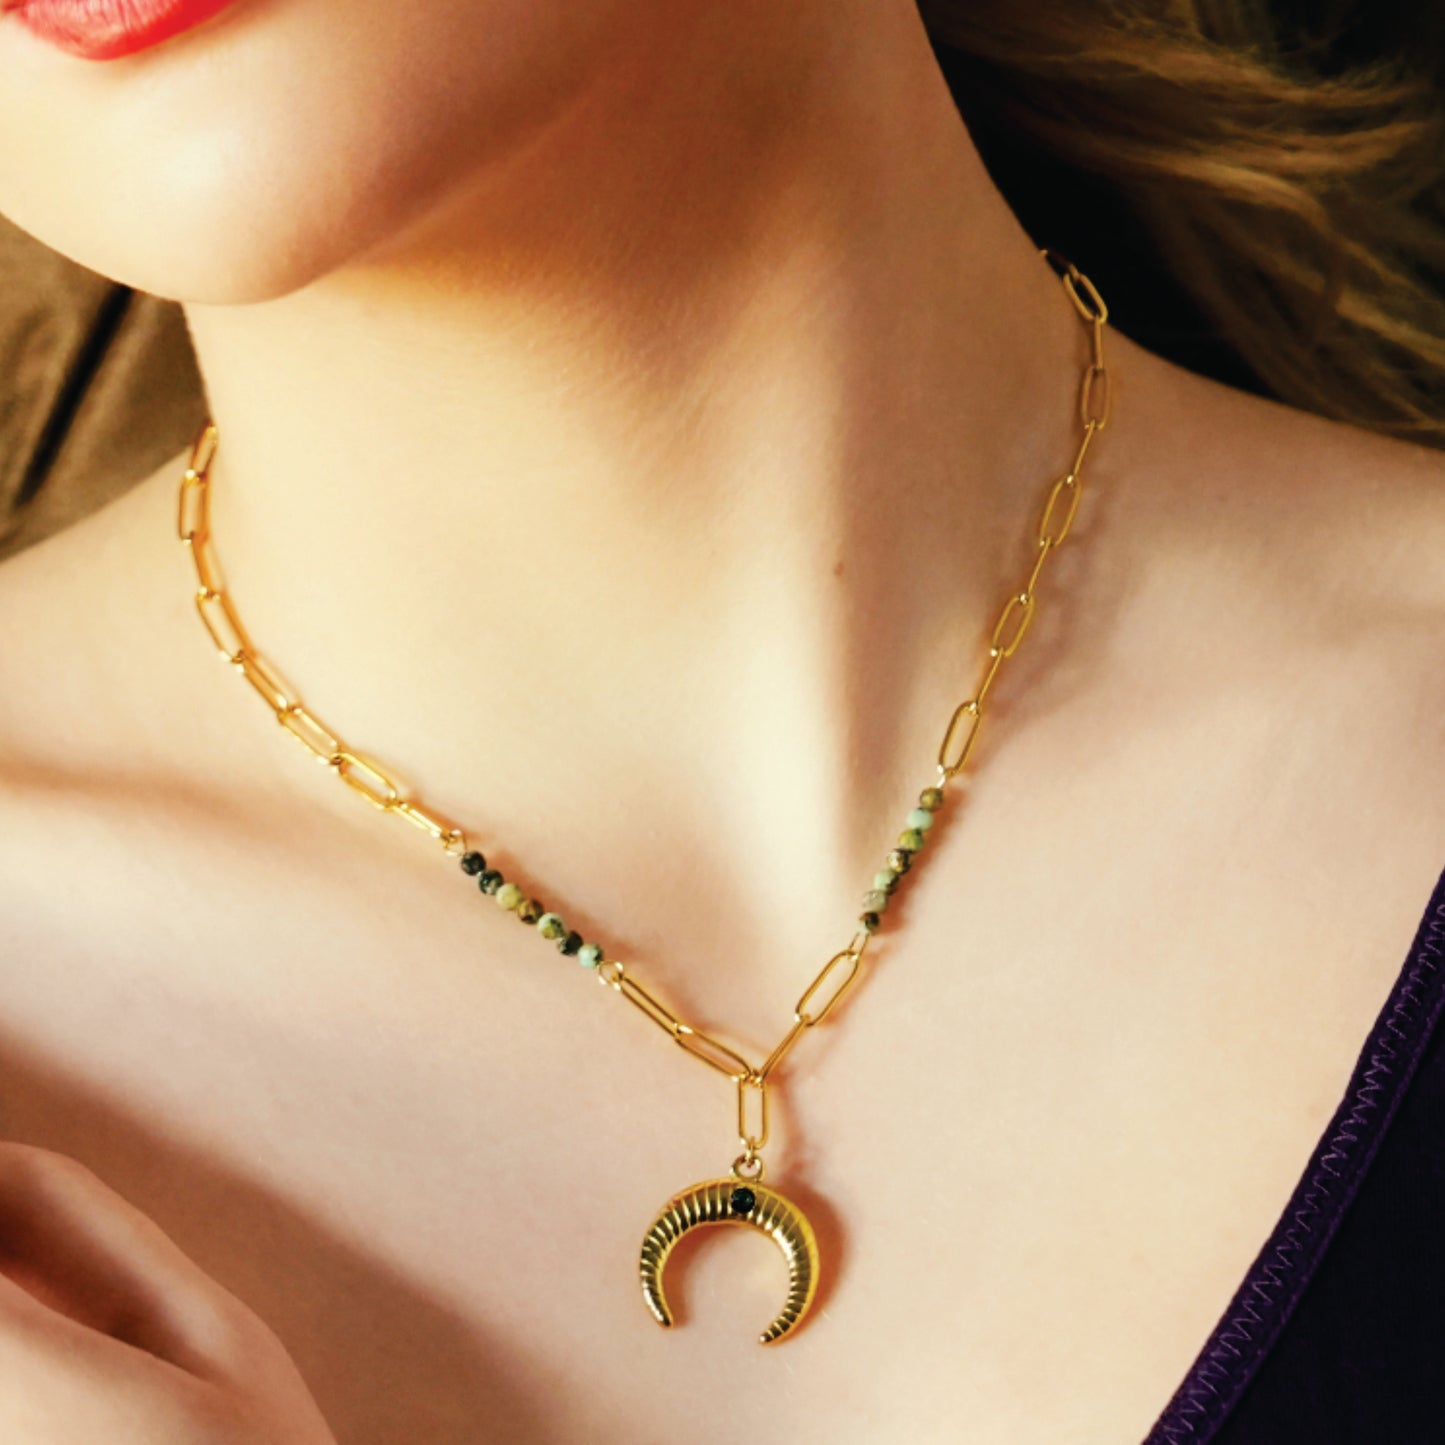 Style LILLE 221011: Boho-Chic African Turquoise Natural Stone Crescent Moon Pendant Gold Necklace.